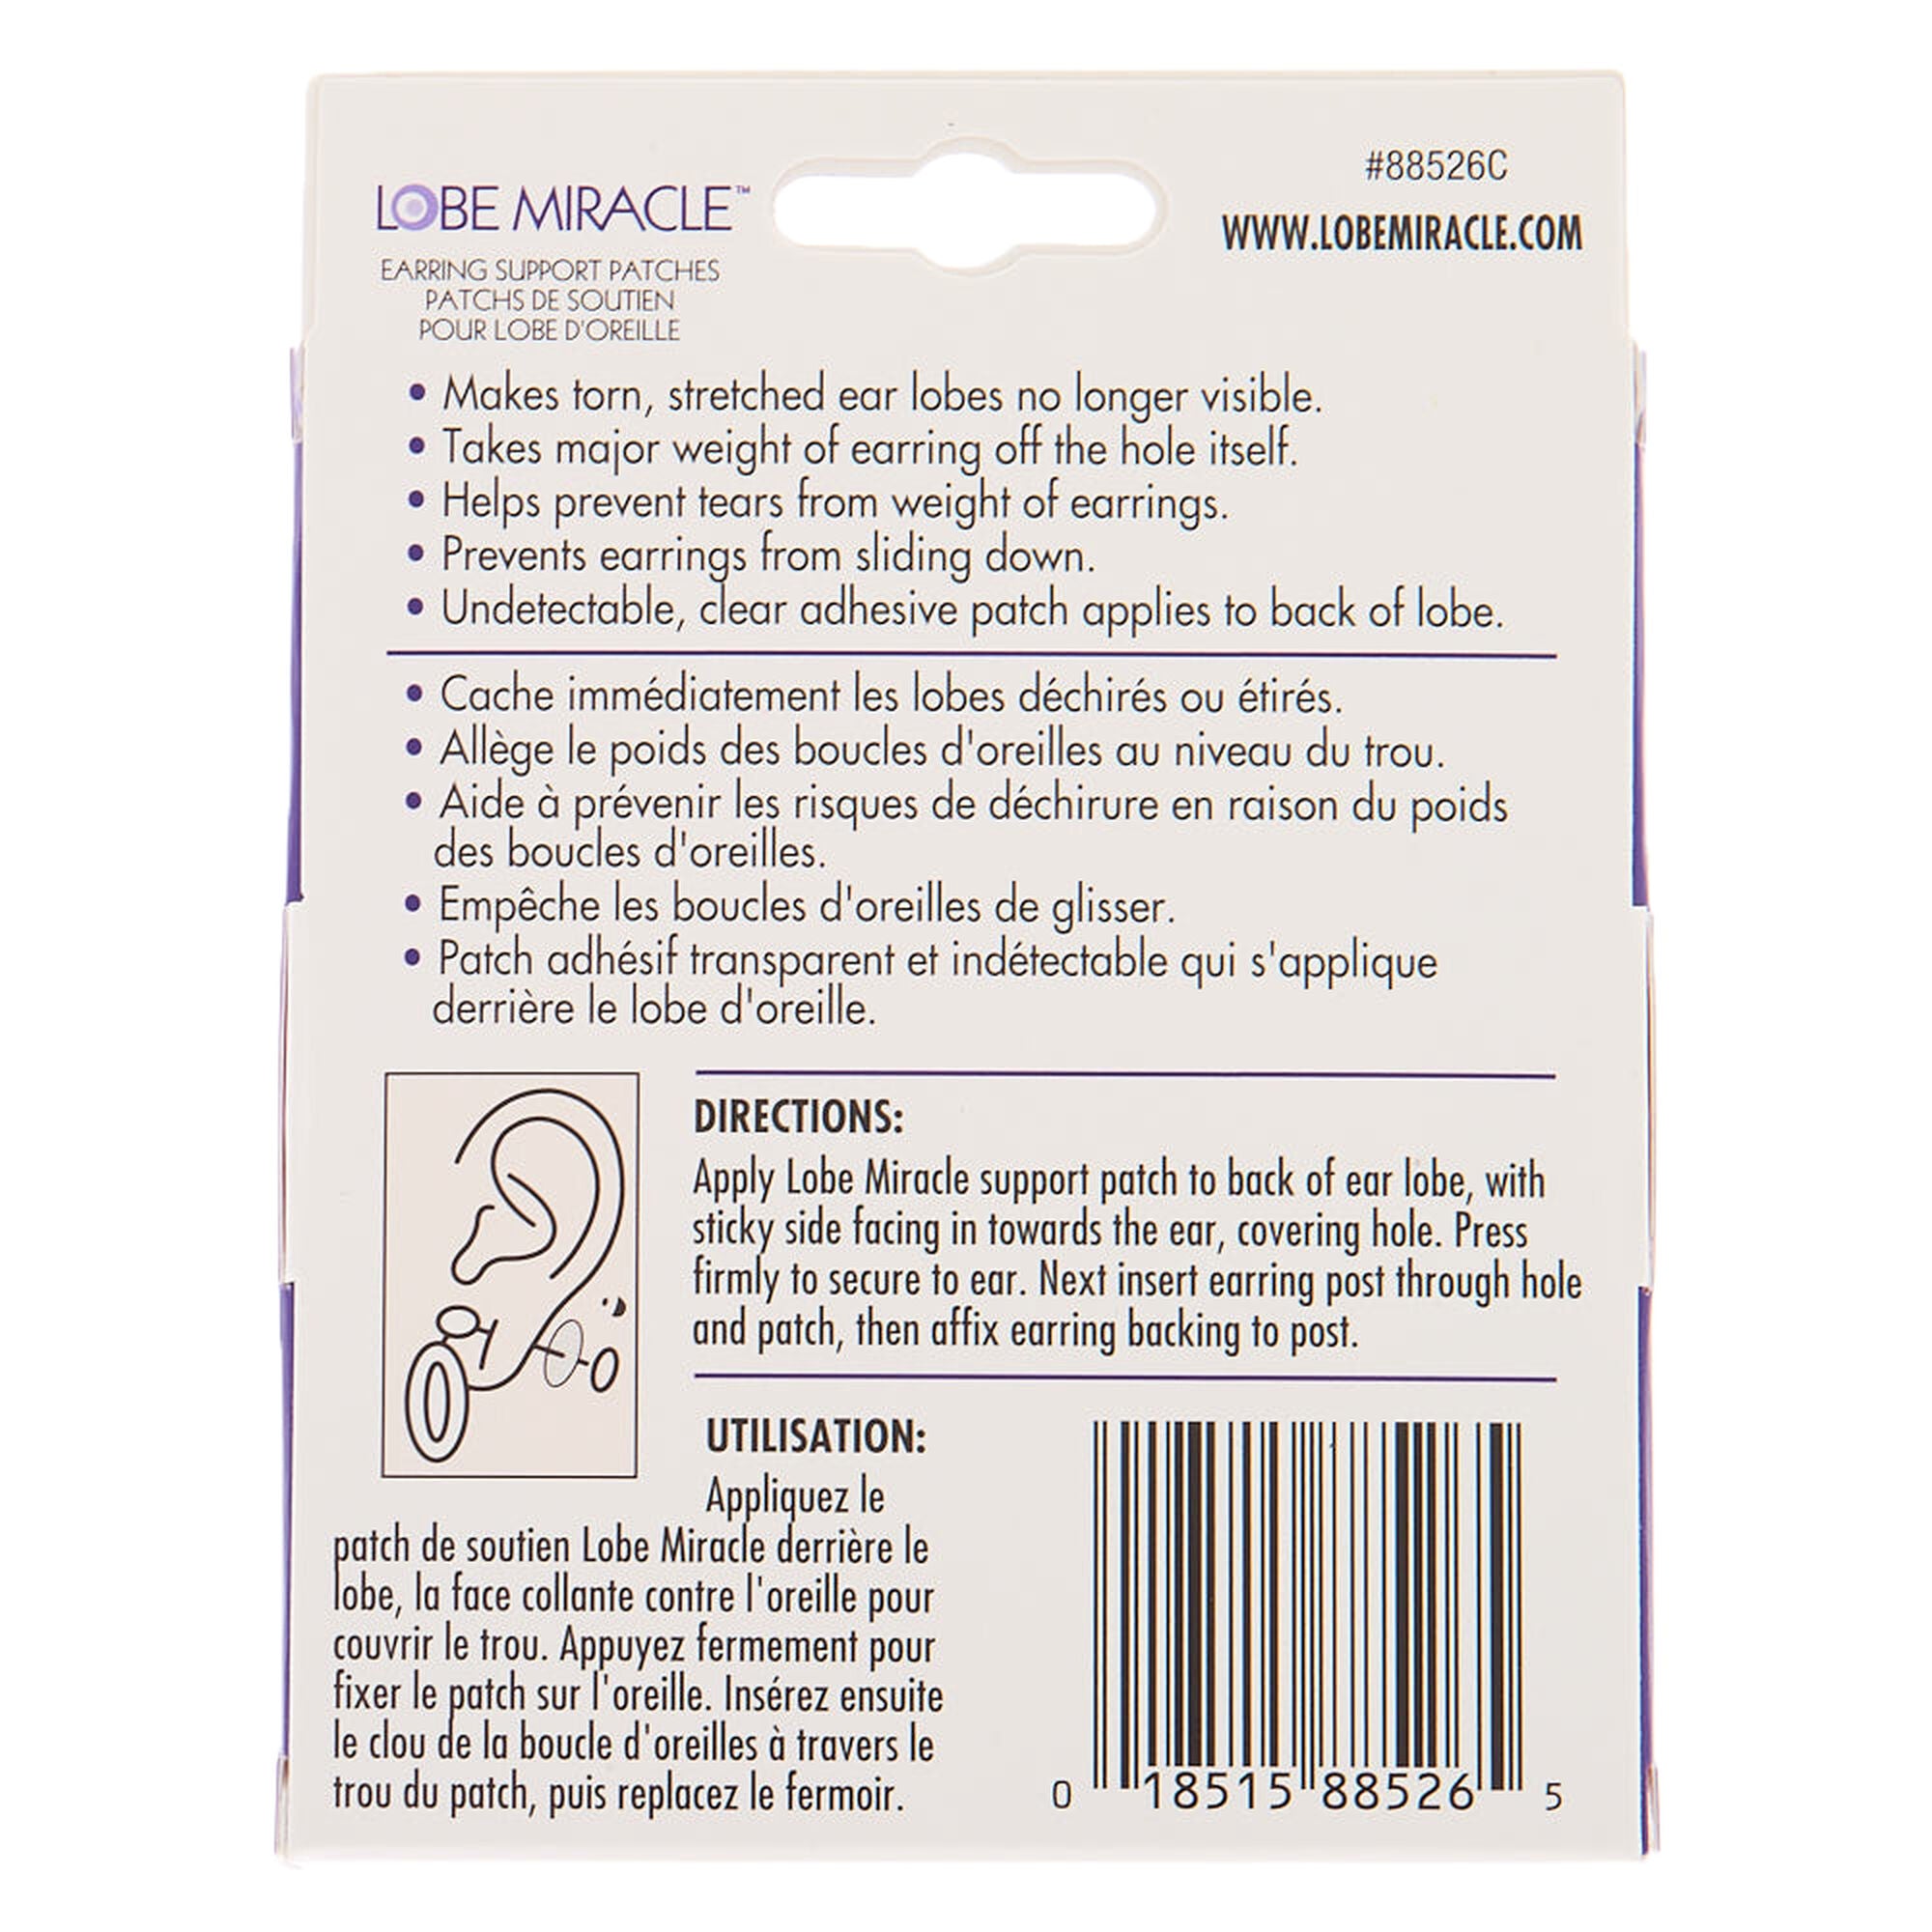 Lobe Miracle Ear Lobe Support Patches